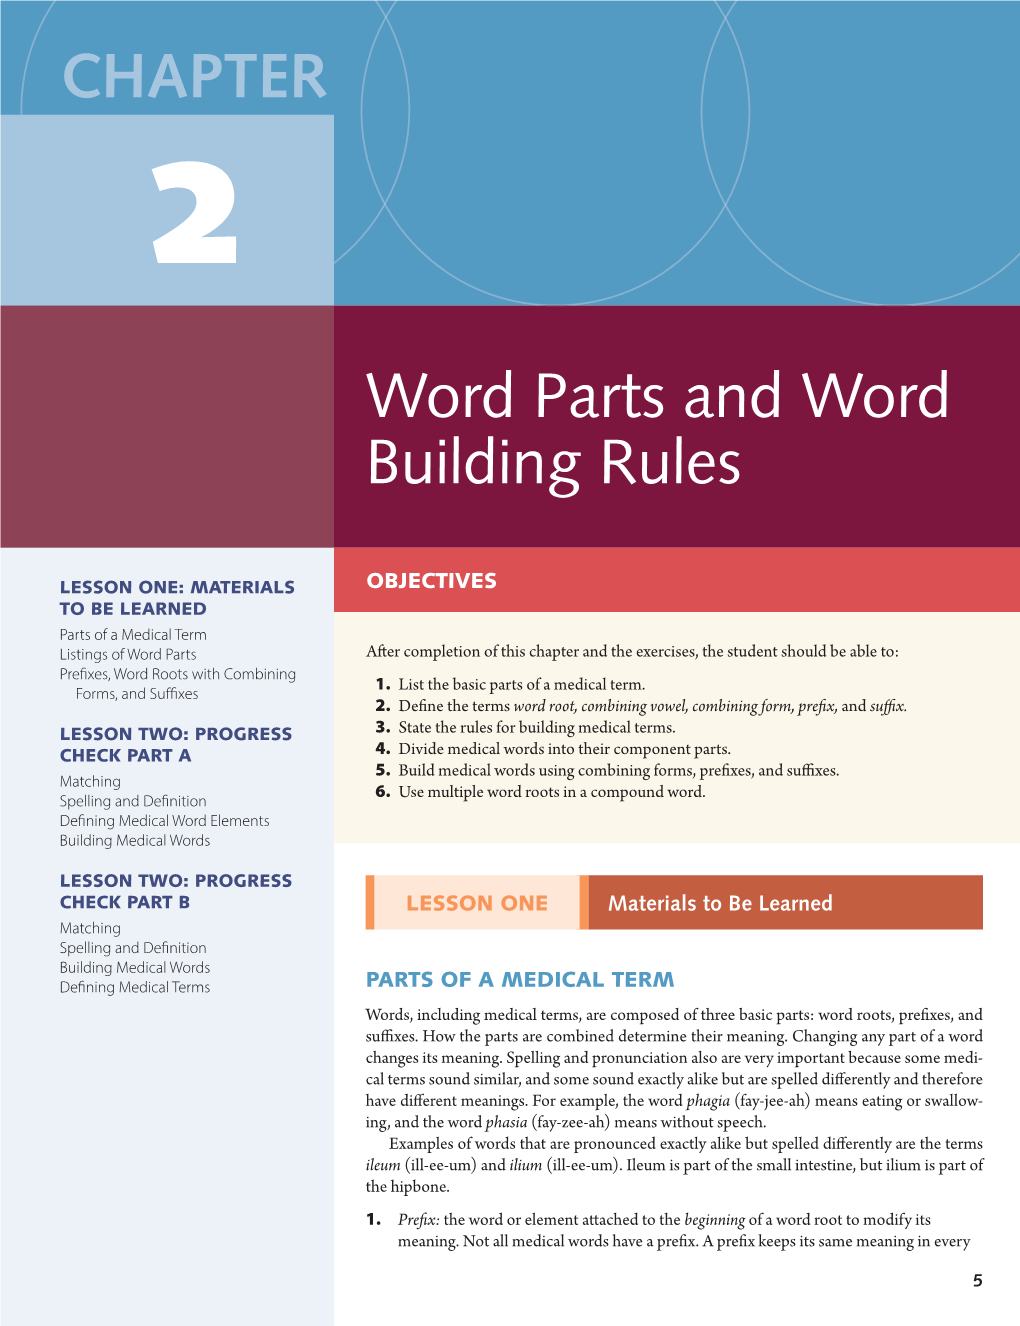 Word Parts and Word Building Rules Chapter